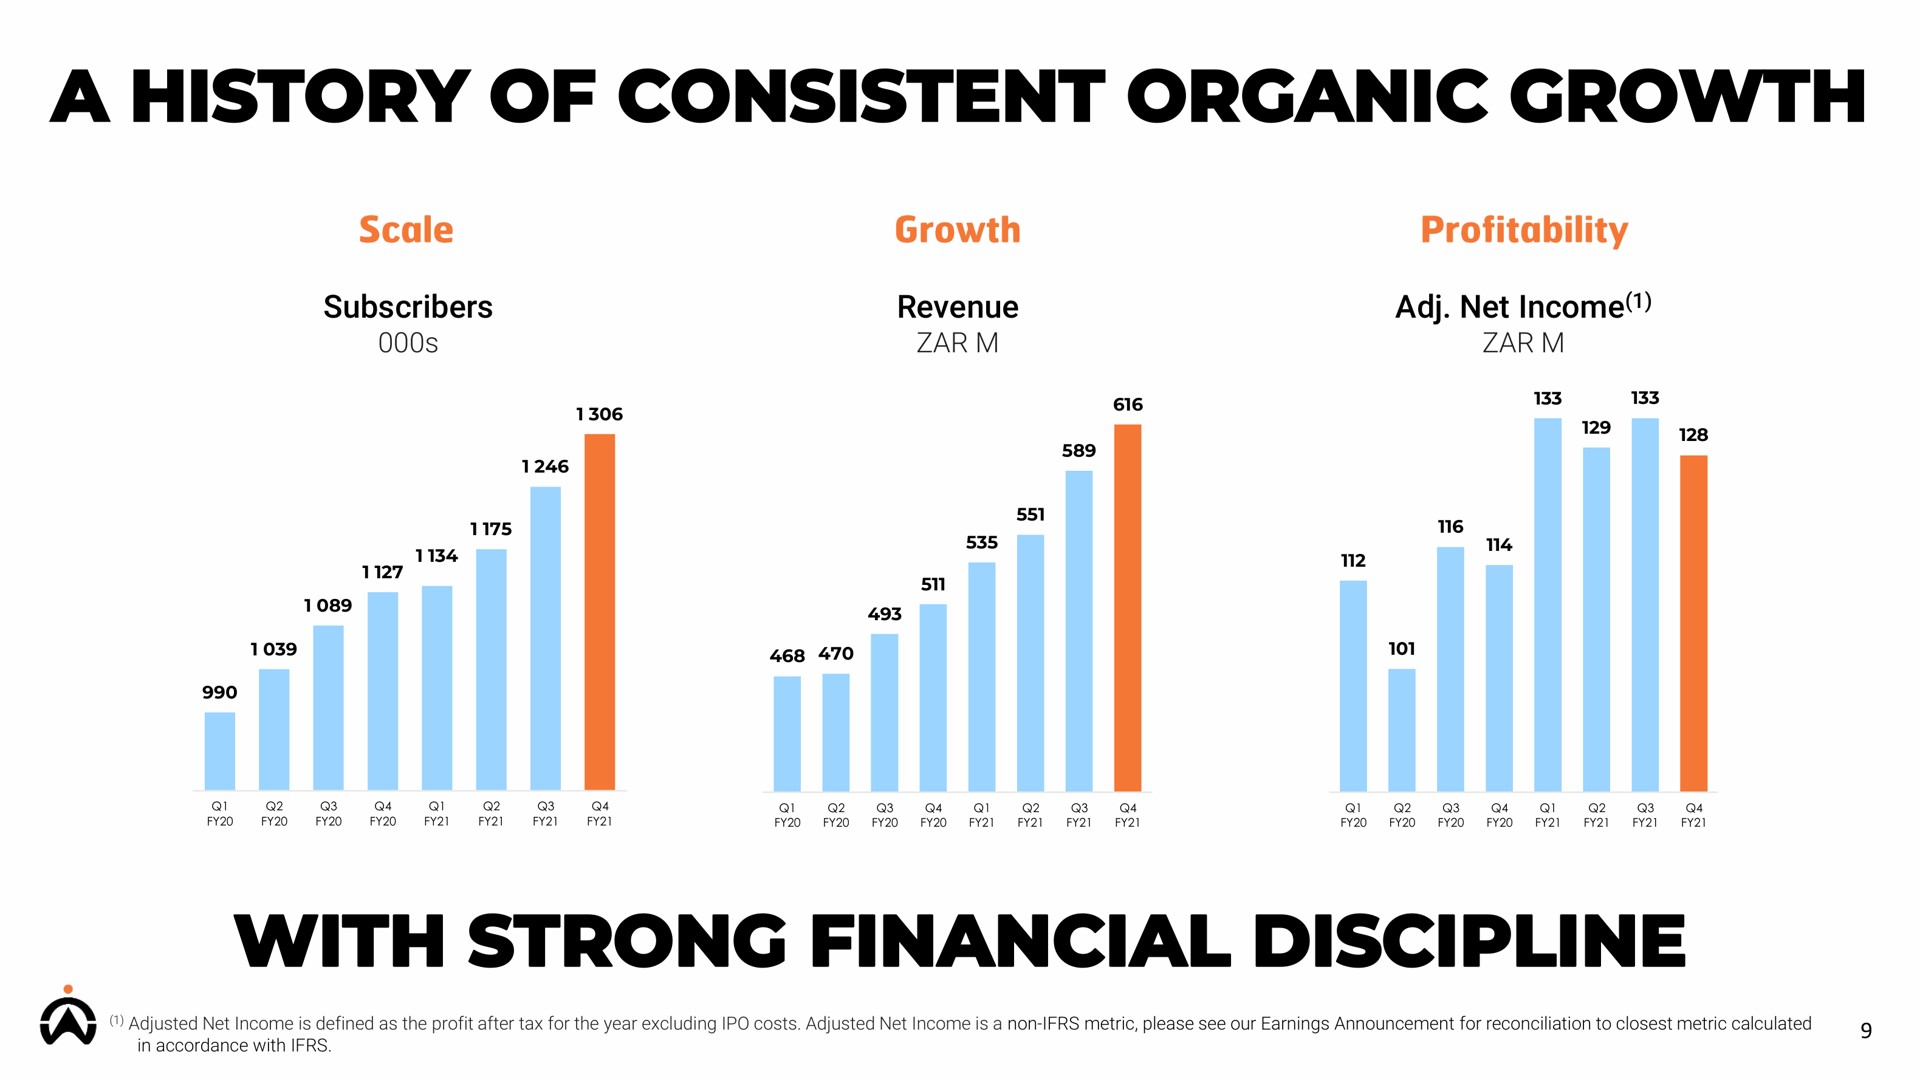 a history of consistent organic growth with strong financial discipline | Karooooo